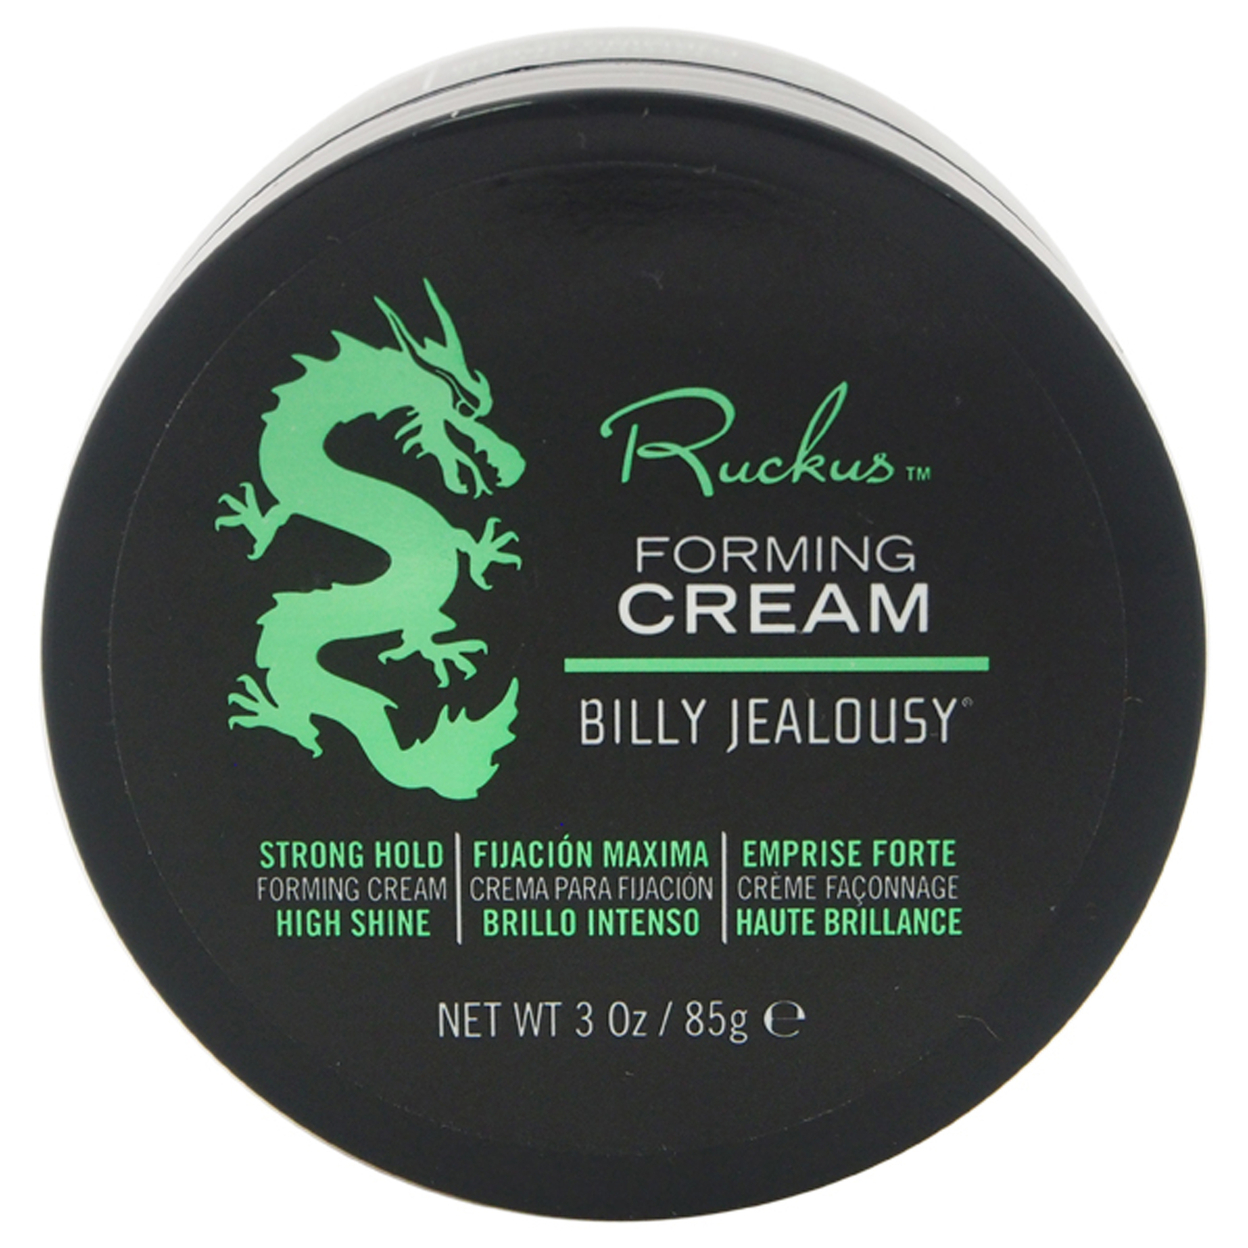 Billy Jealousy Men HAIRCARE Ruckus Forming Cream 3 Oz